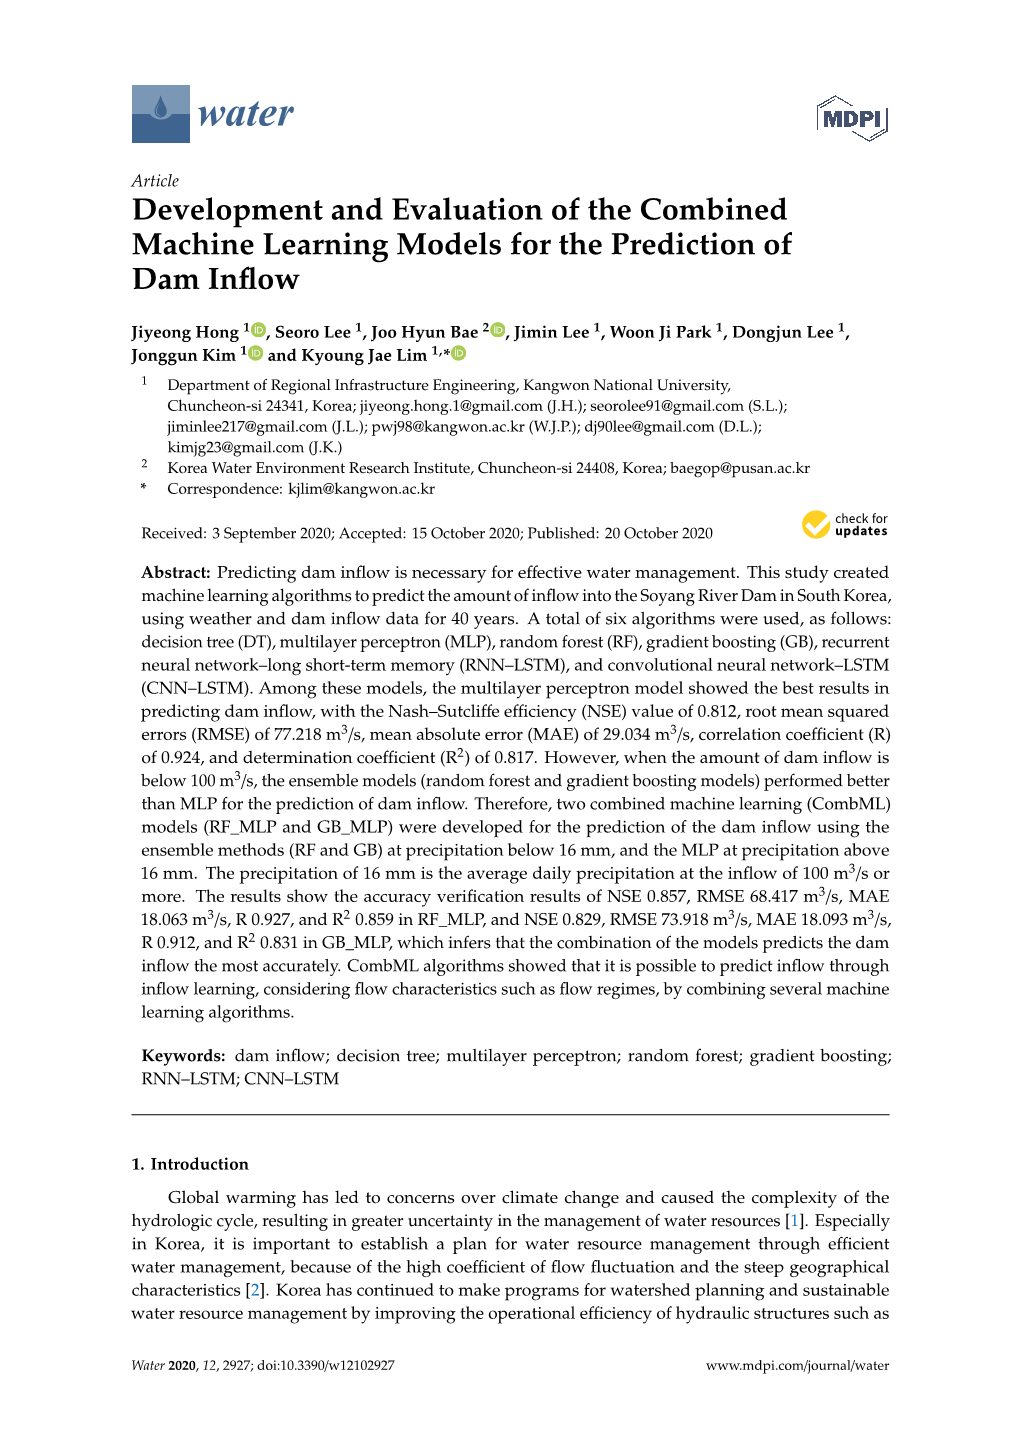 Development and Evaluation of the Combined Machine Learning Models for the Prediction of Dam Inflow